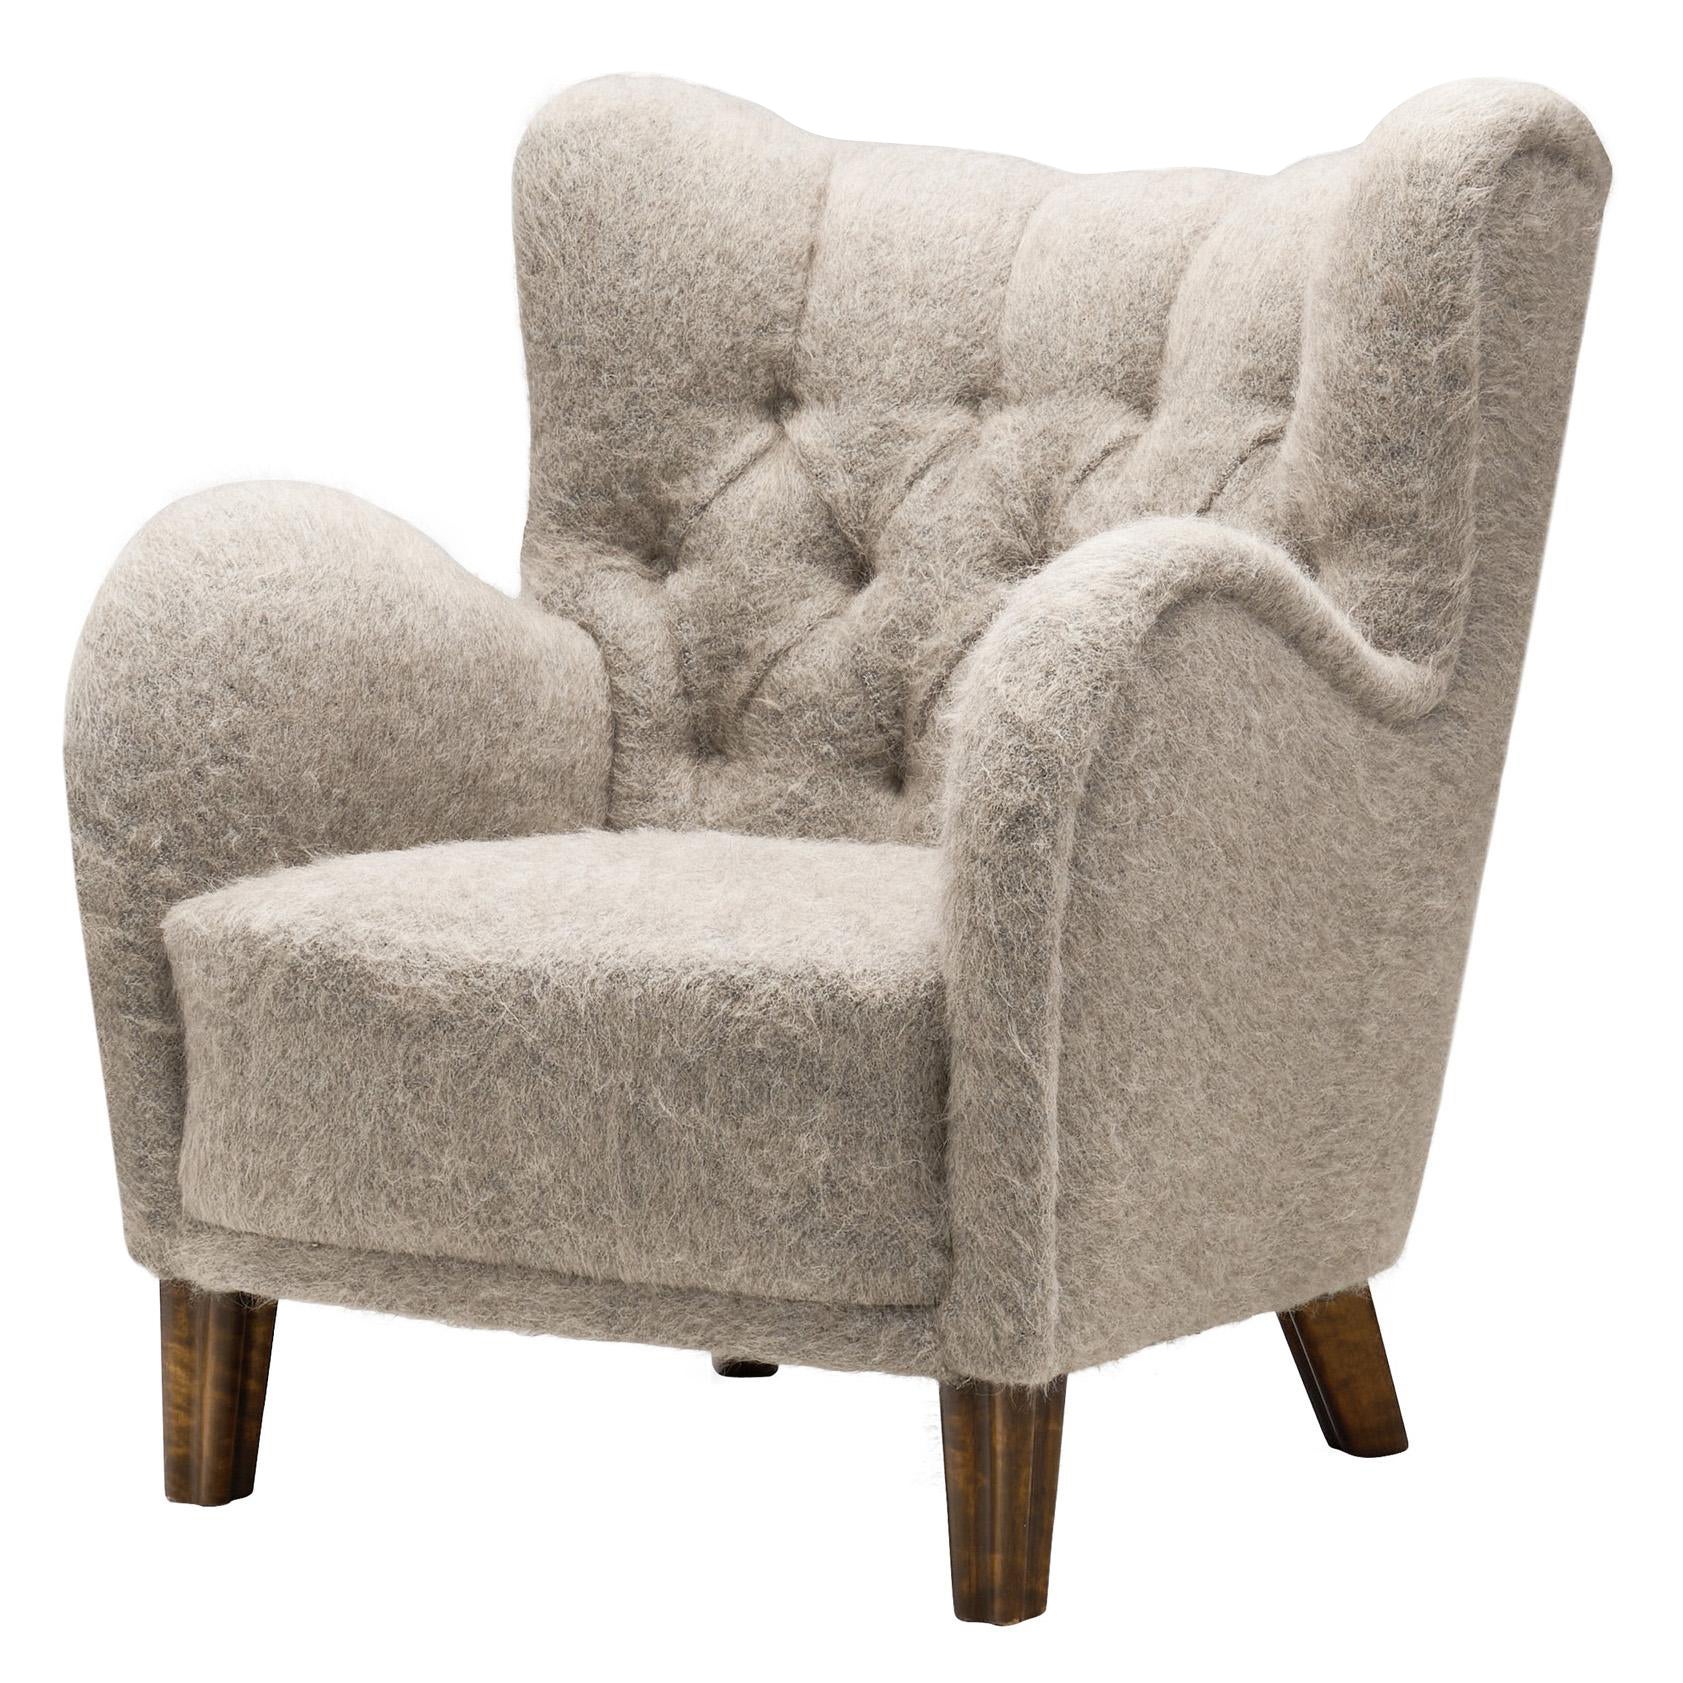 European Cabinetmaker Armchair Upholstered in Wool, Europe ca 1950s For Sale